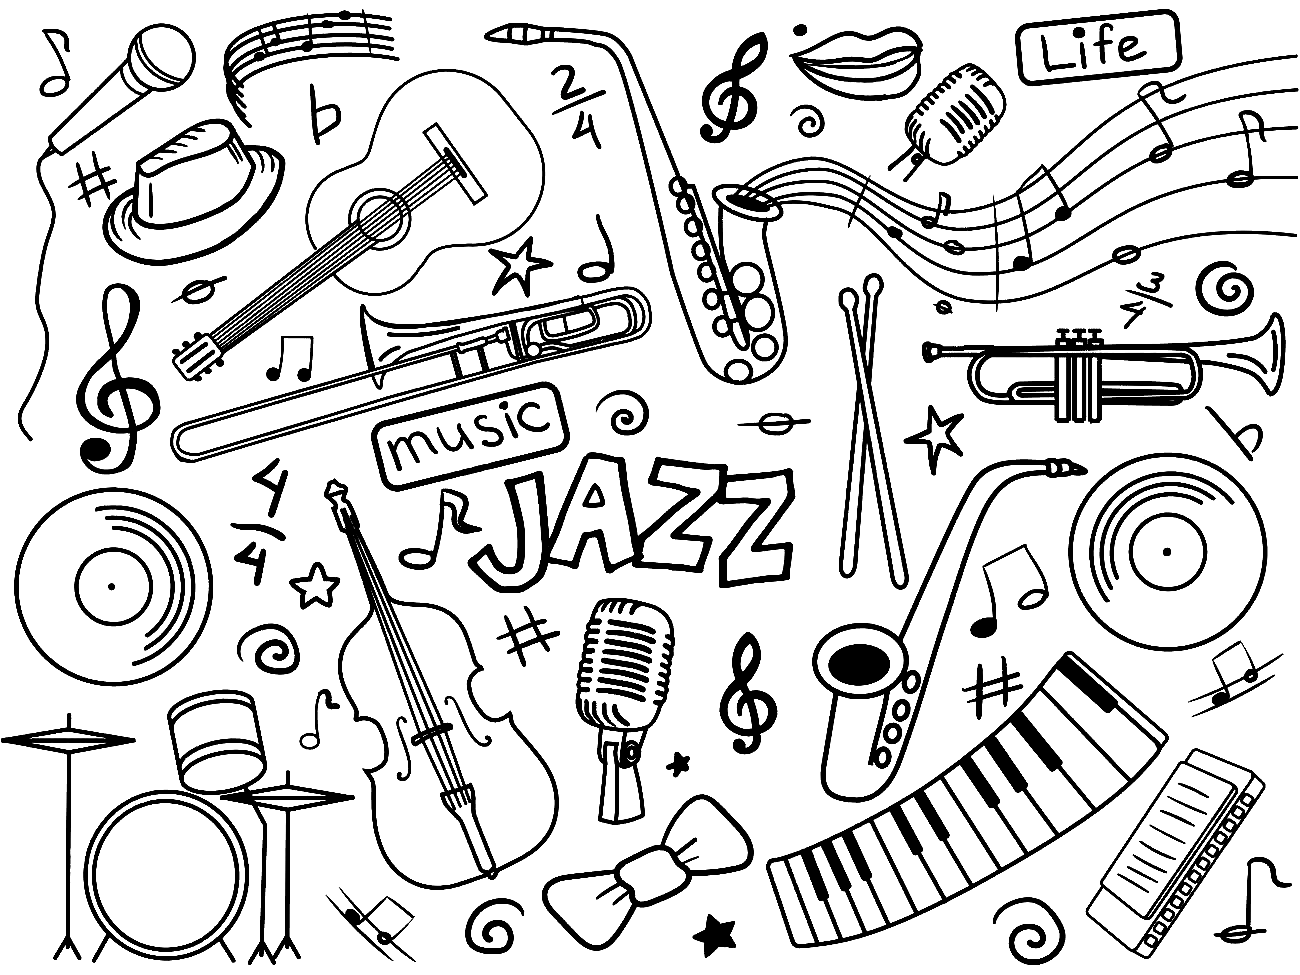 Louis armstrong jazz musician coloring page